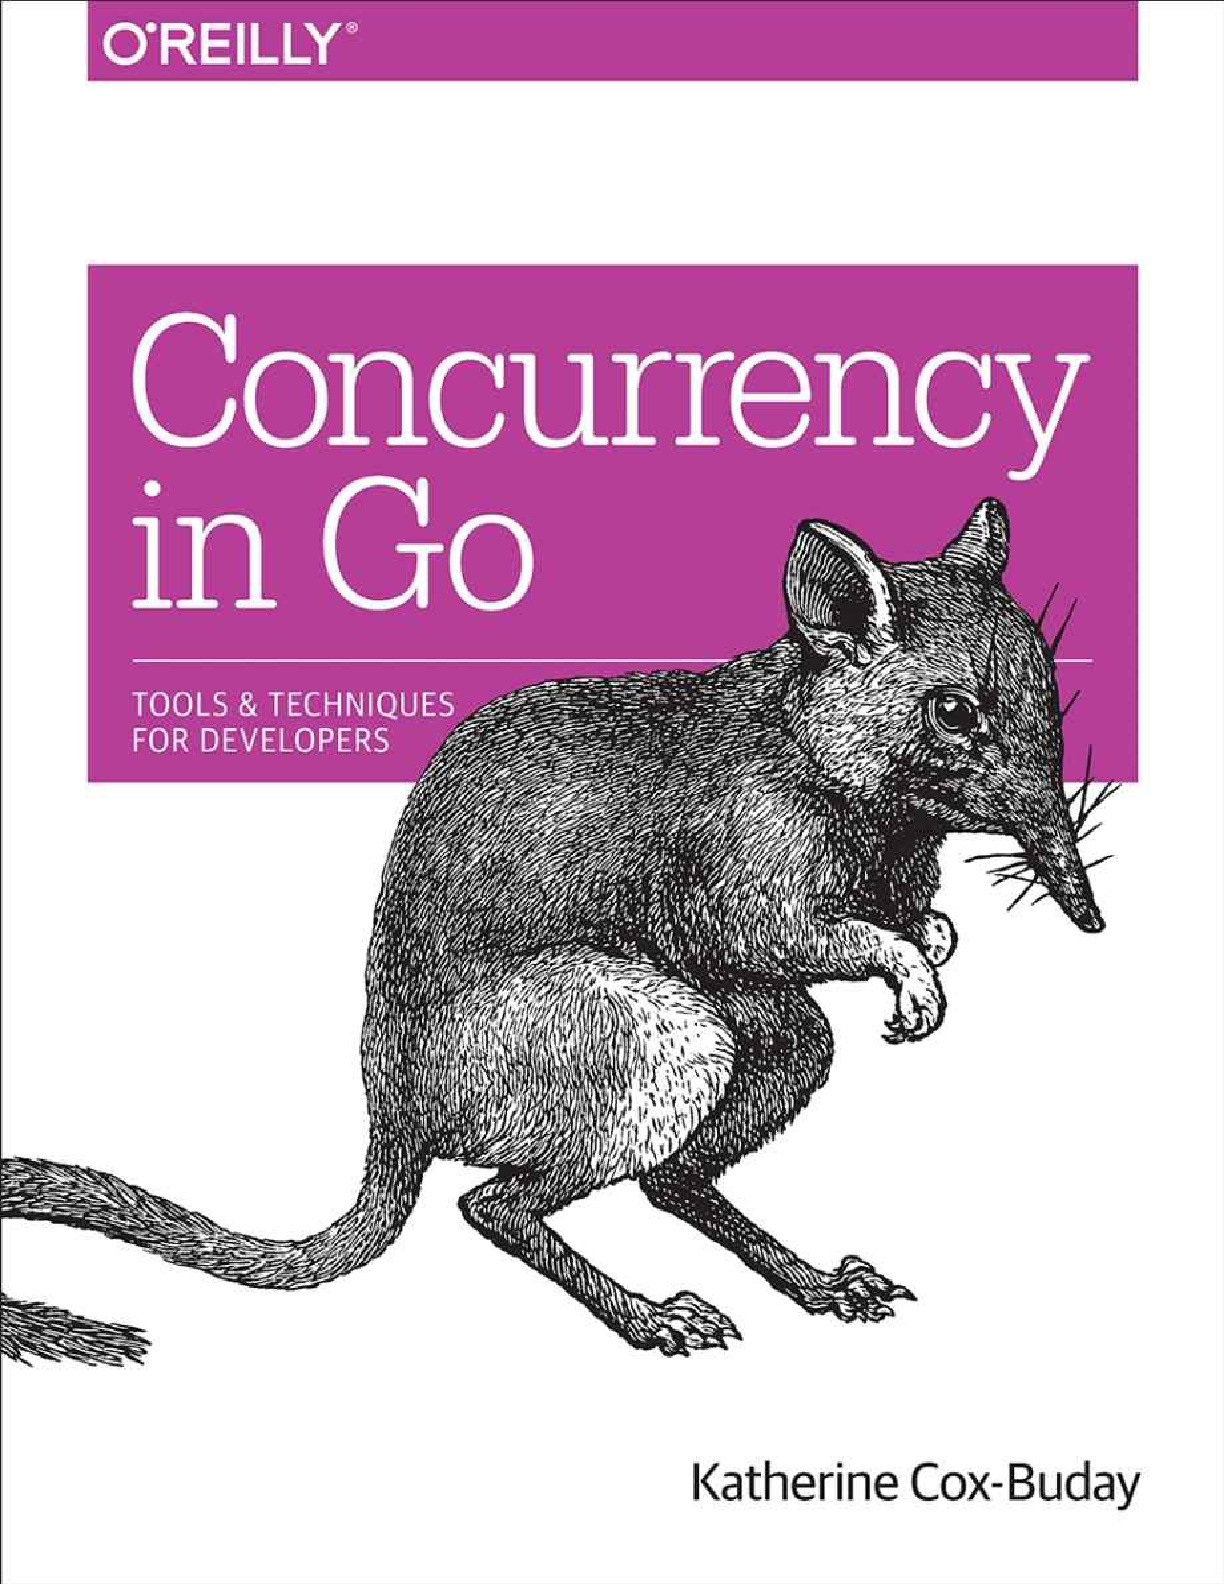 Concurrency in Go – Tools and Techniques for Developers